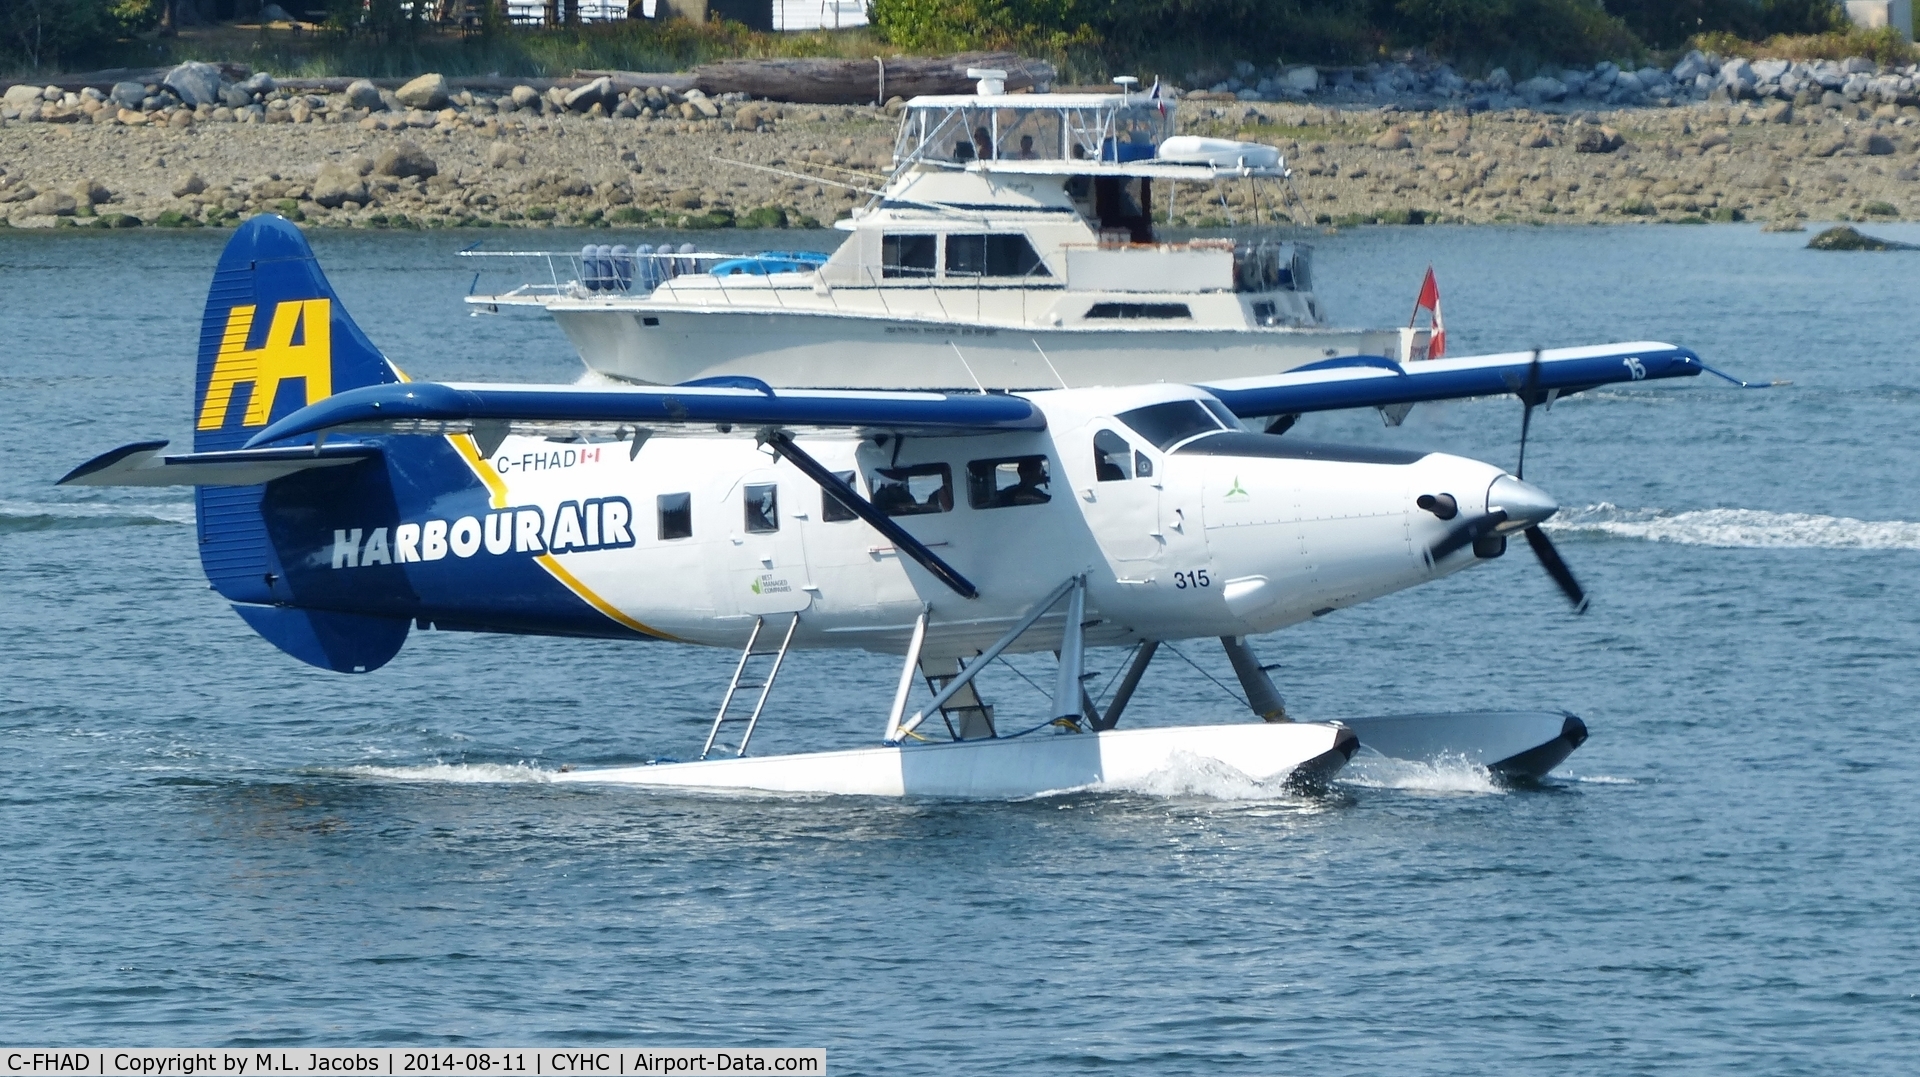 C-FHAD, 1956 De Havilland Canada DHC-3T Vazar Turbine Otter Otter C/N 119, Harbour Air #315 taxiing for takeoff from Coal Harbour.